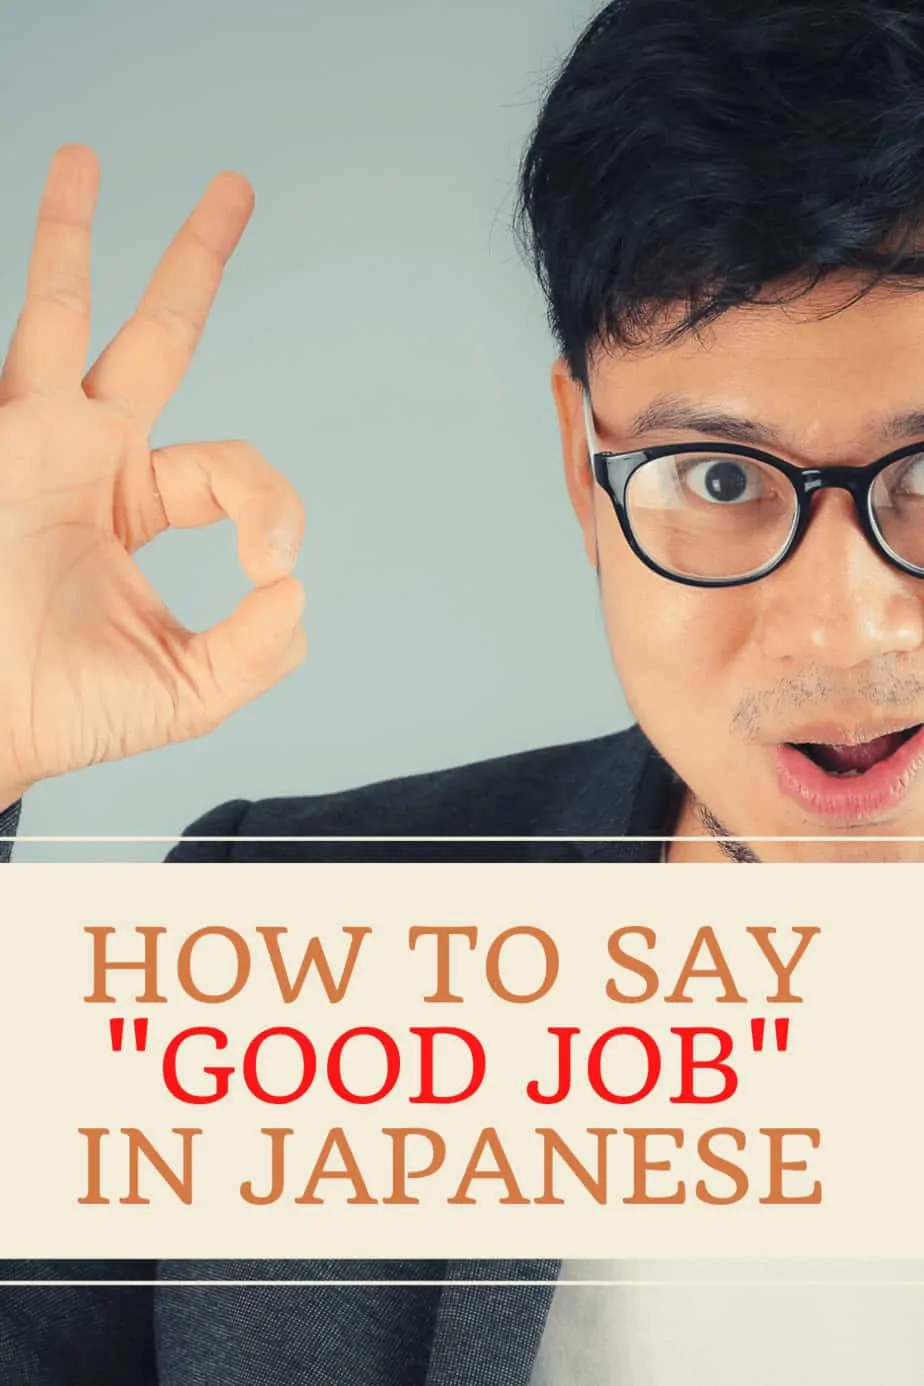 How to Say "Good Job "in Japanese